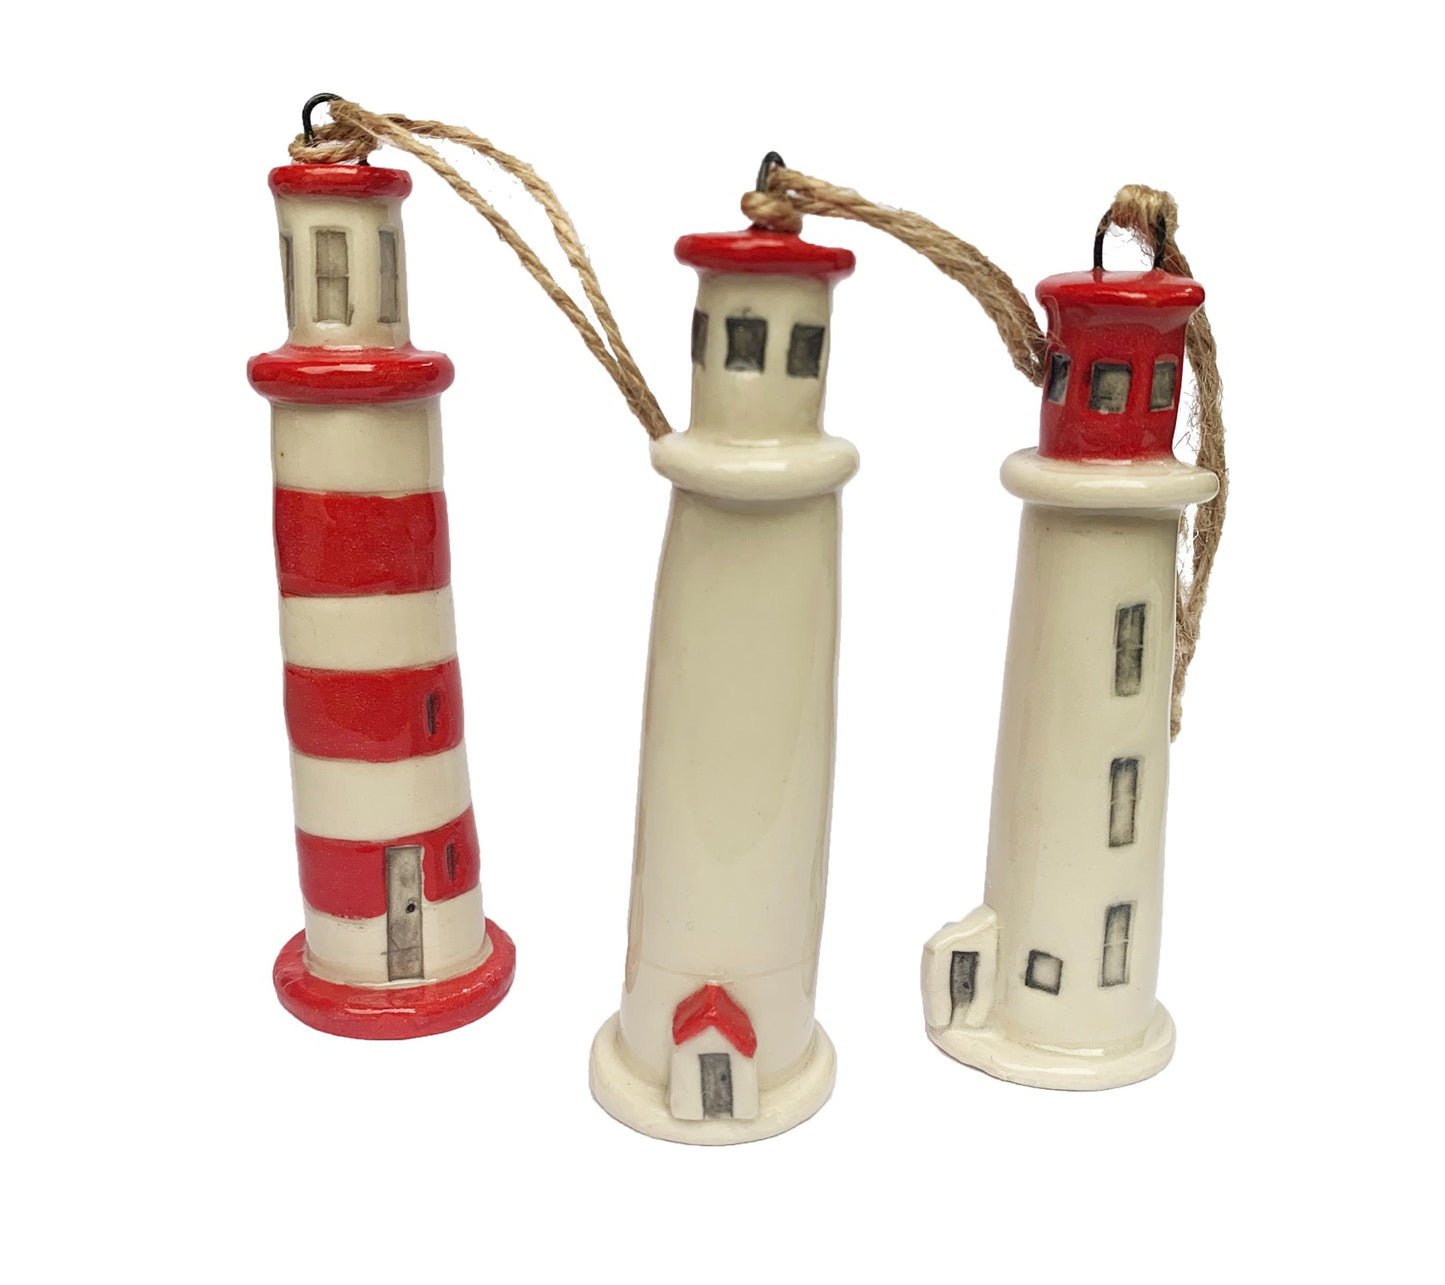 Three hand painted ceramic red and white lighthouse ornaments made in Nova Scotia, Canada.